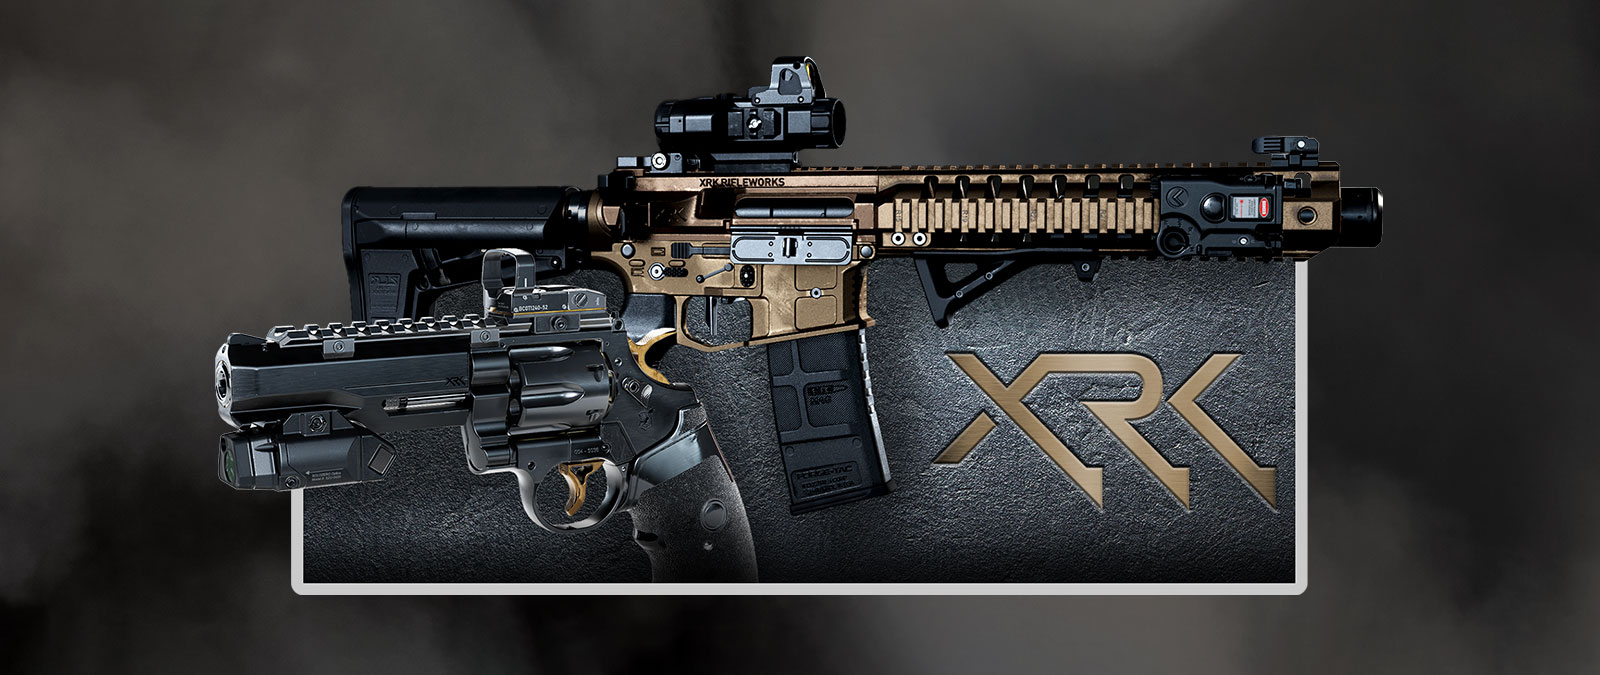 Sideview of two guns on top of a textured background and XRK logo